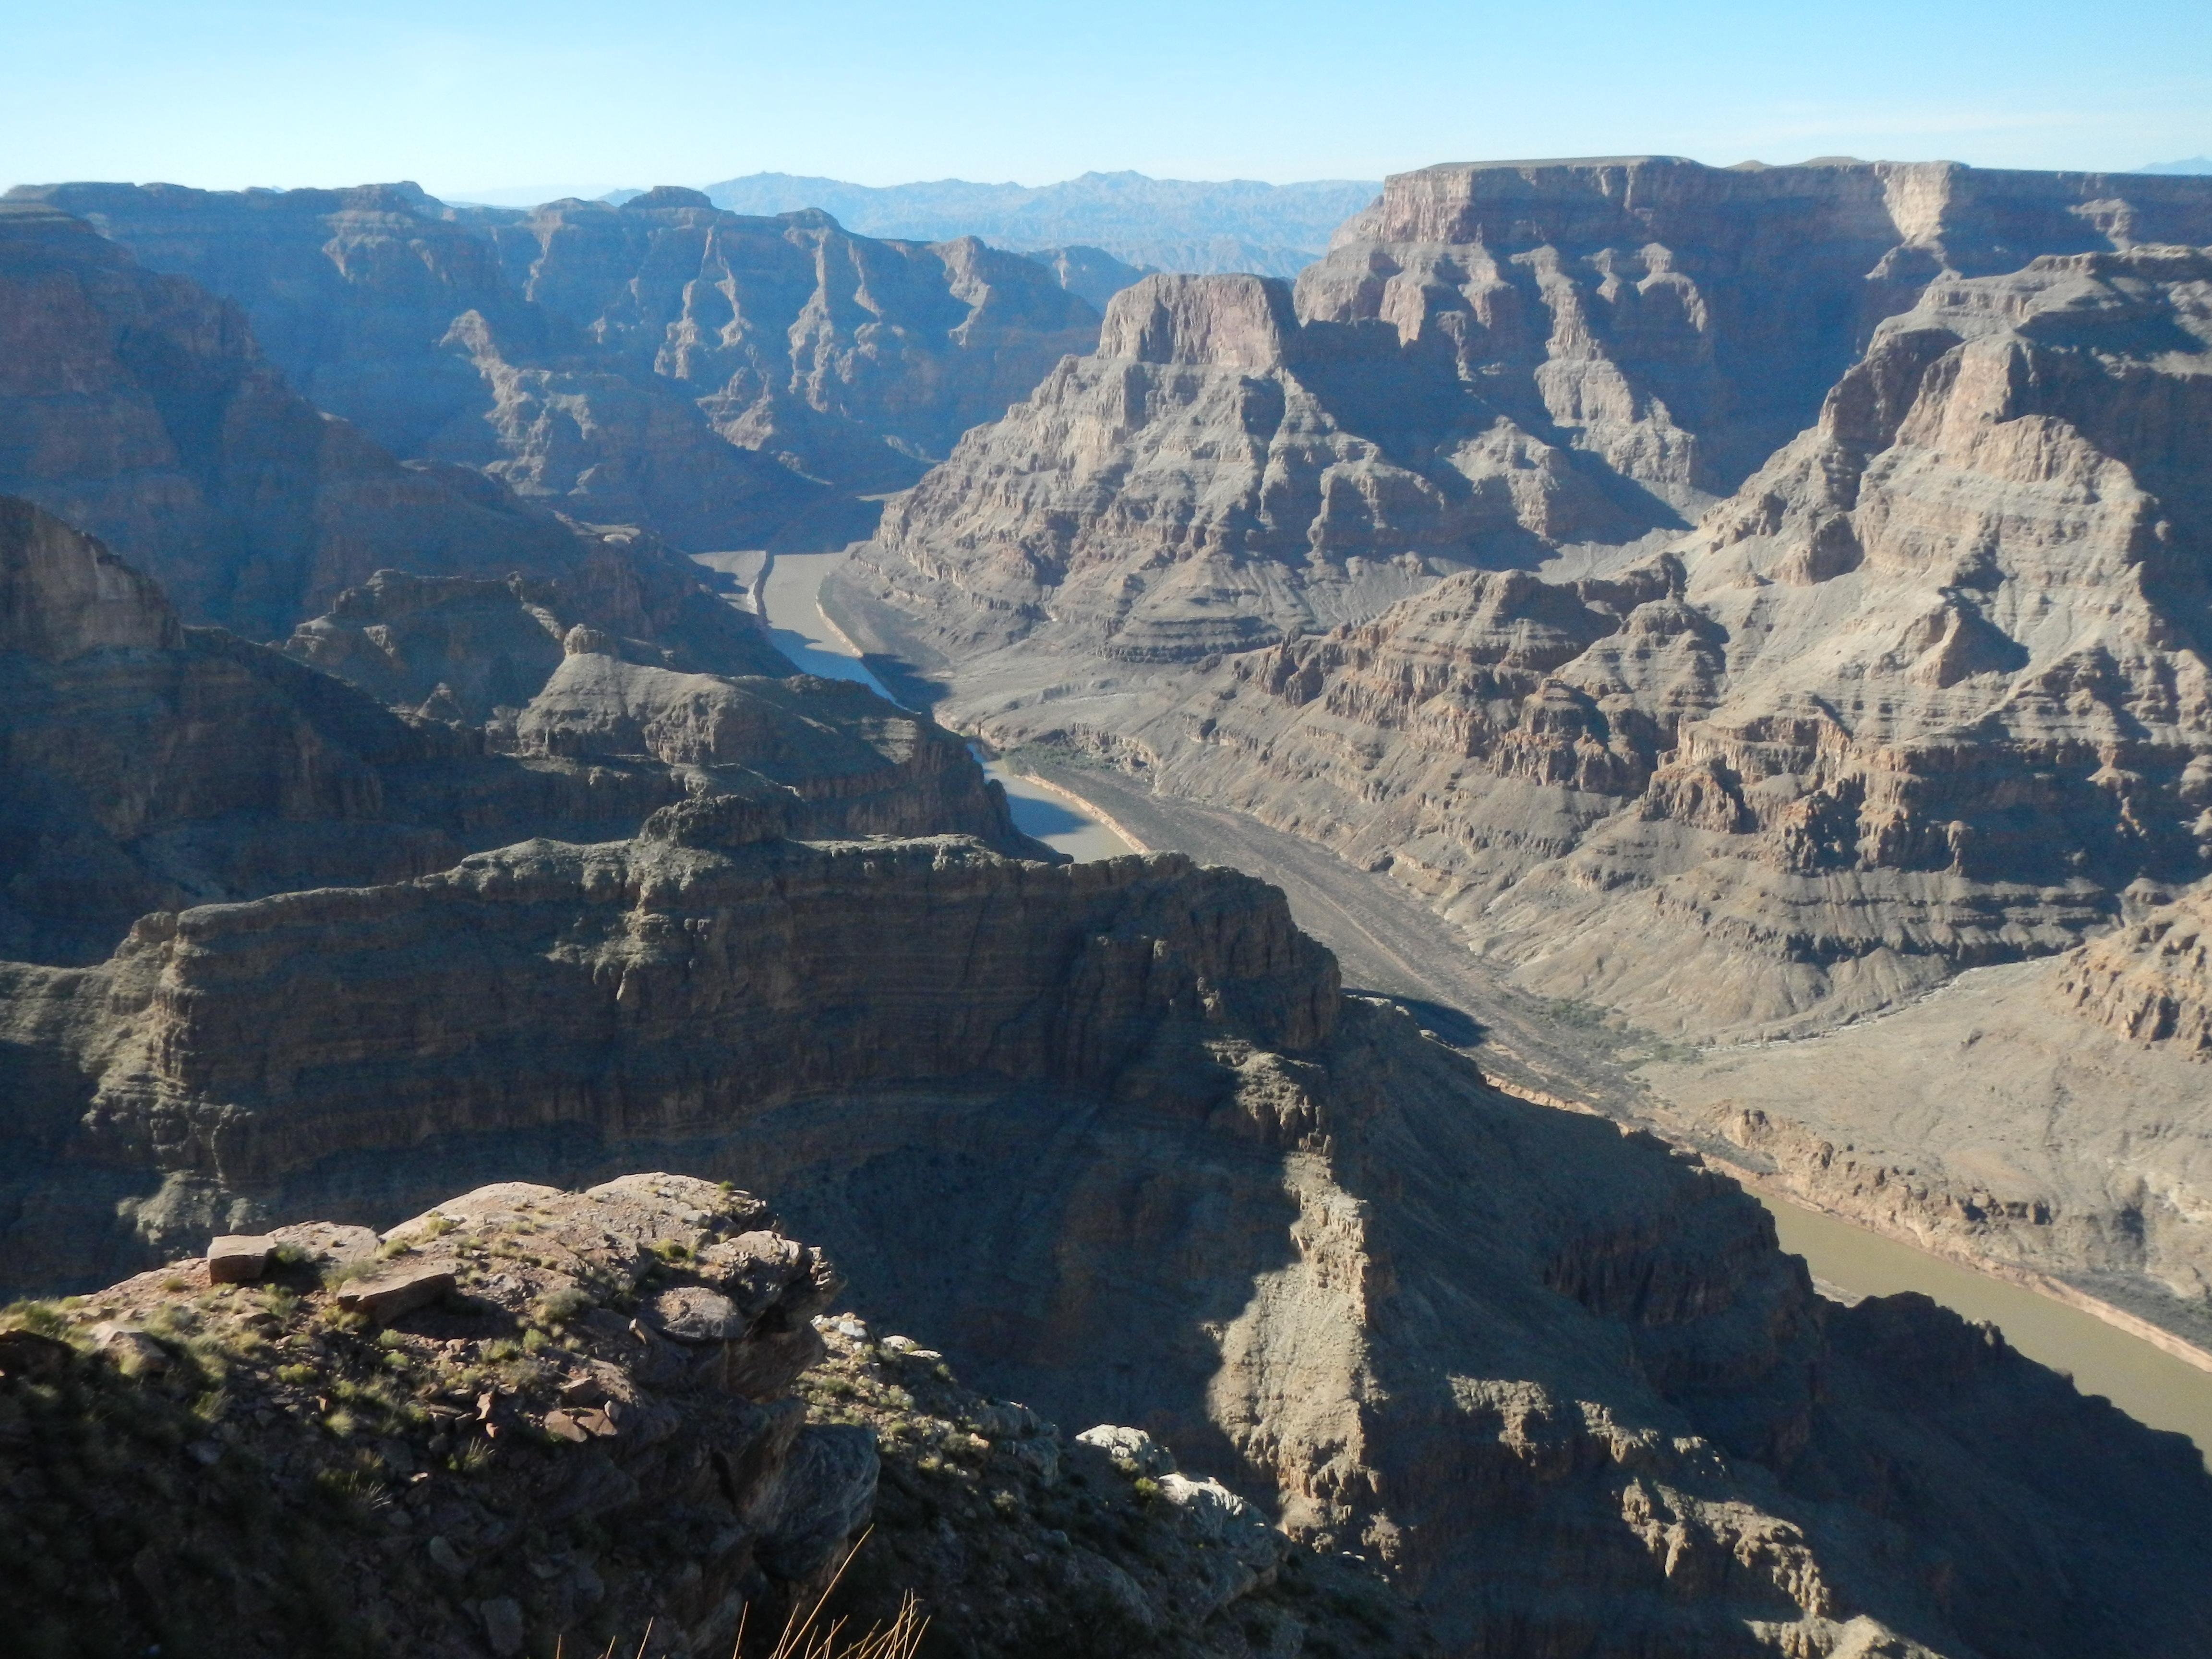 The Colorado River from Guano Point